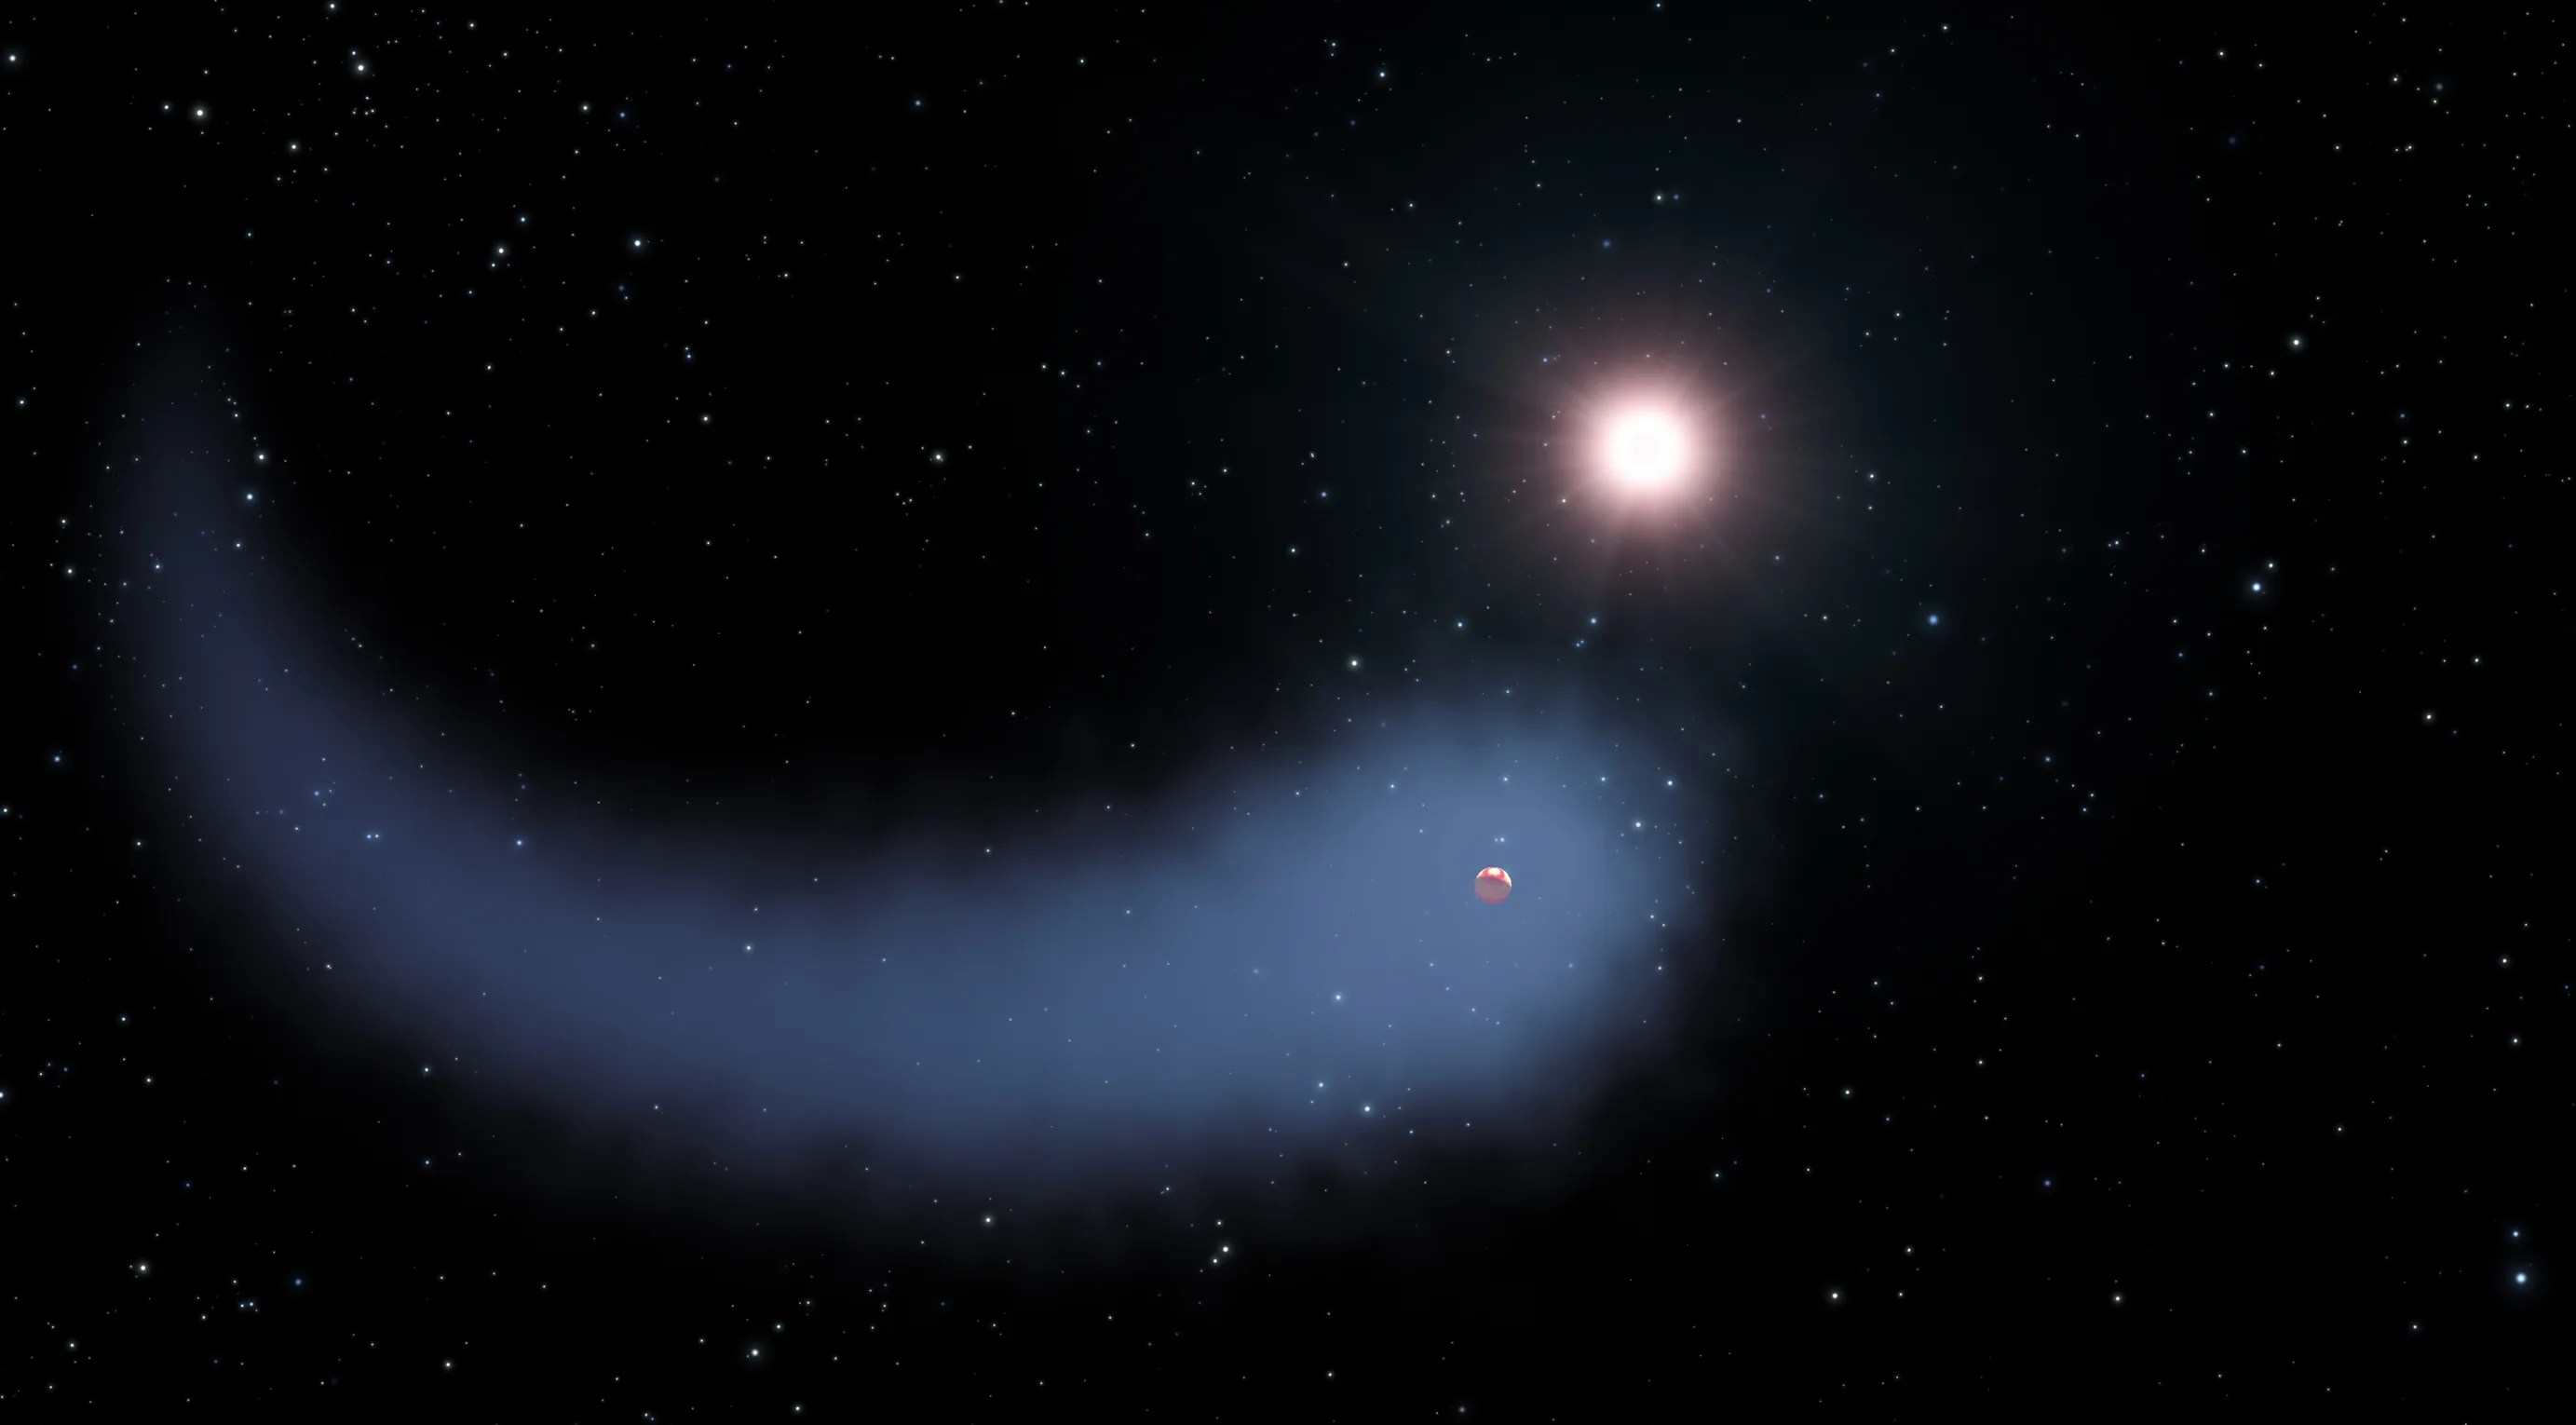 A tiny planet is nestled inside the head of a swooping comet-like tail of gas and dust. It faces its star.